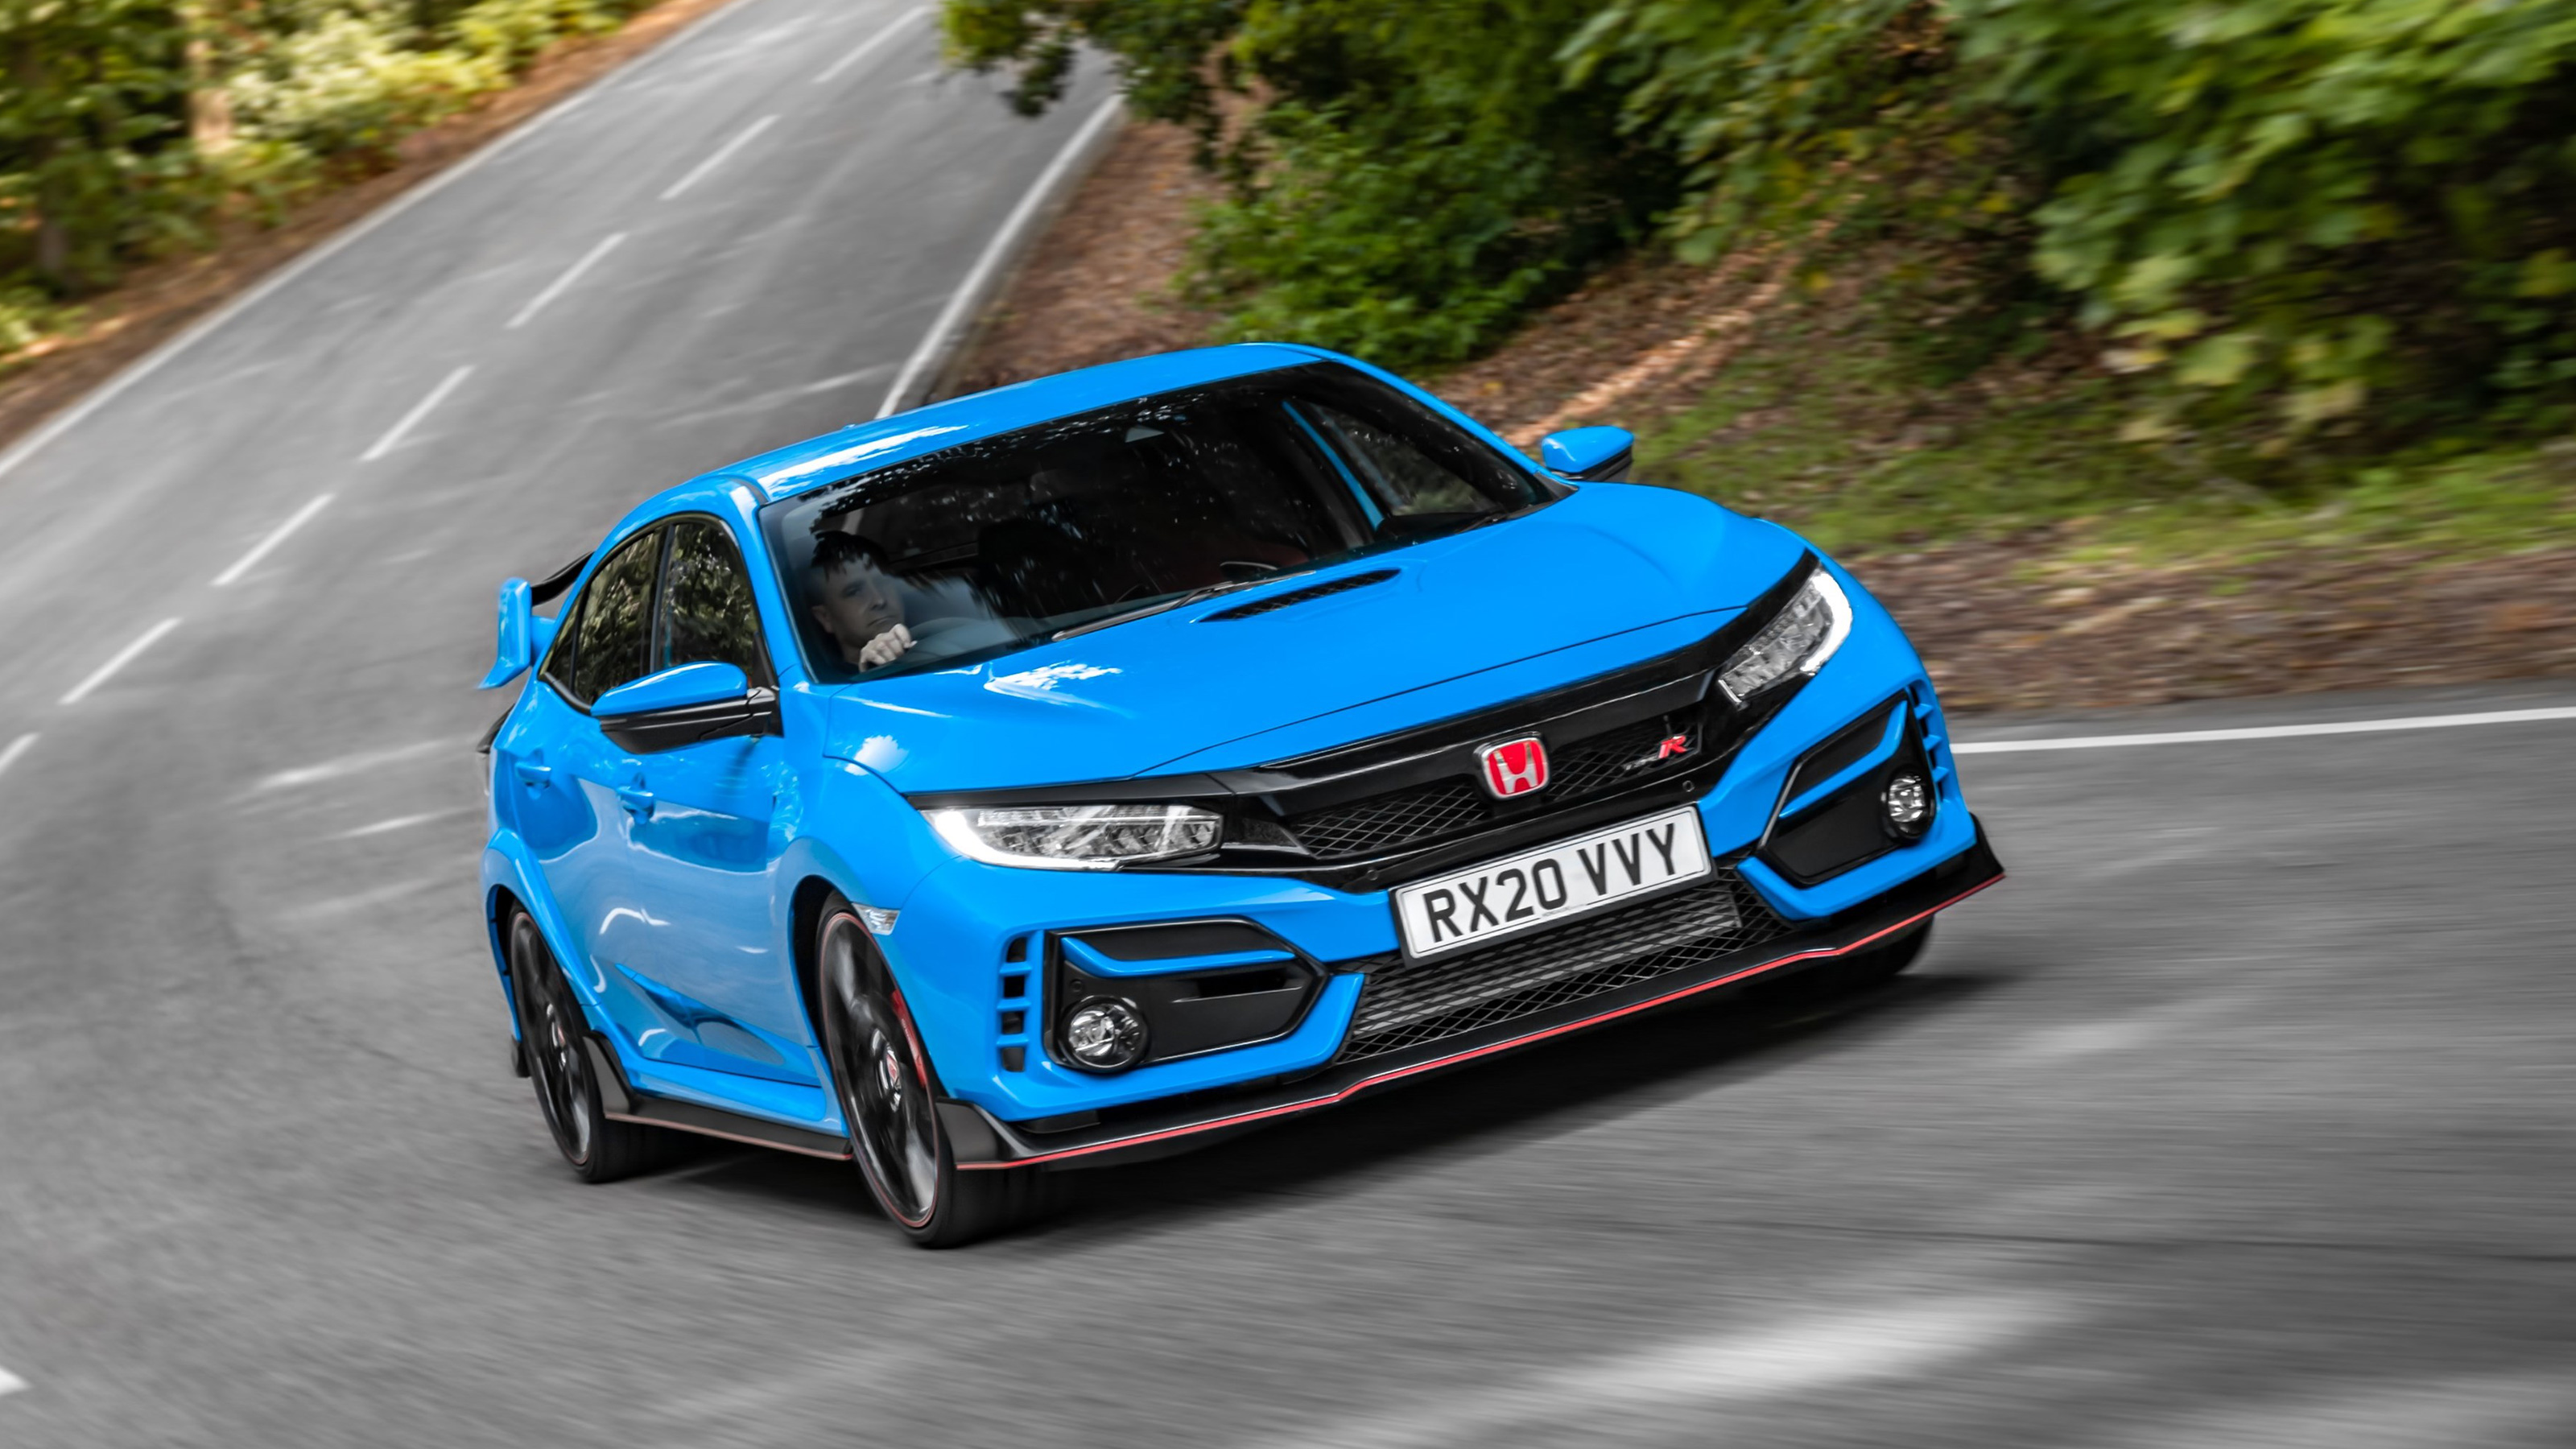 Honda Civic Type R review - gallery | Carbuyer